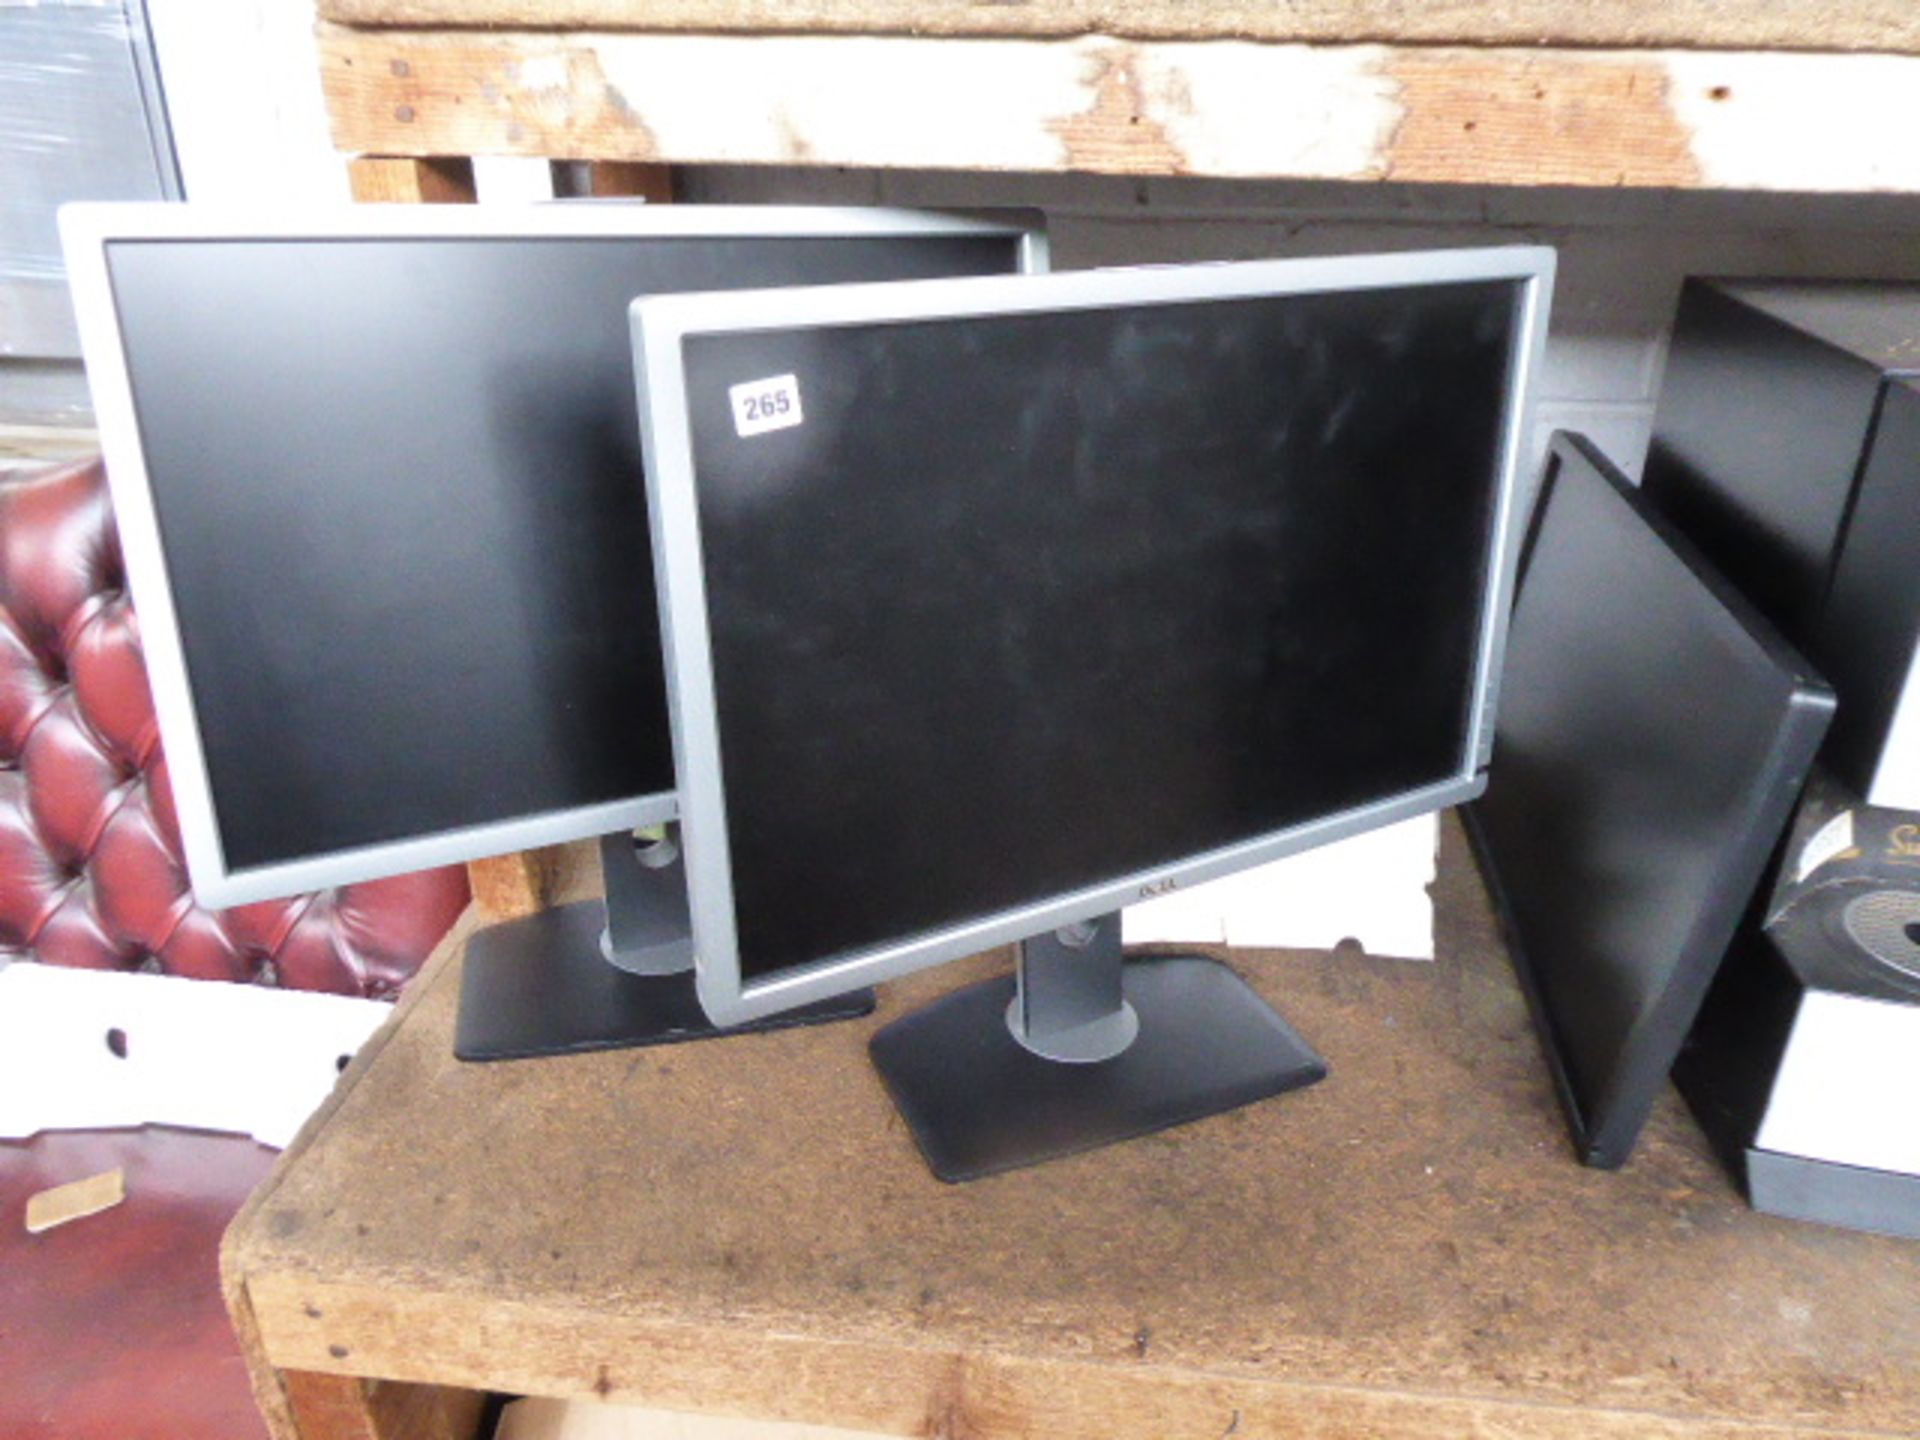 2 large Dell flat screen monitors with stands and 1 monitor without stand